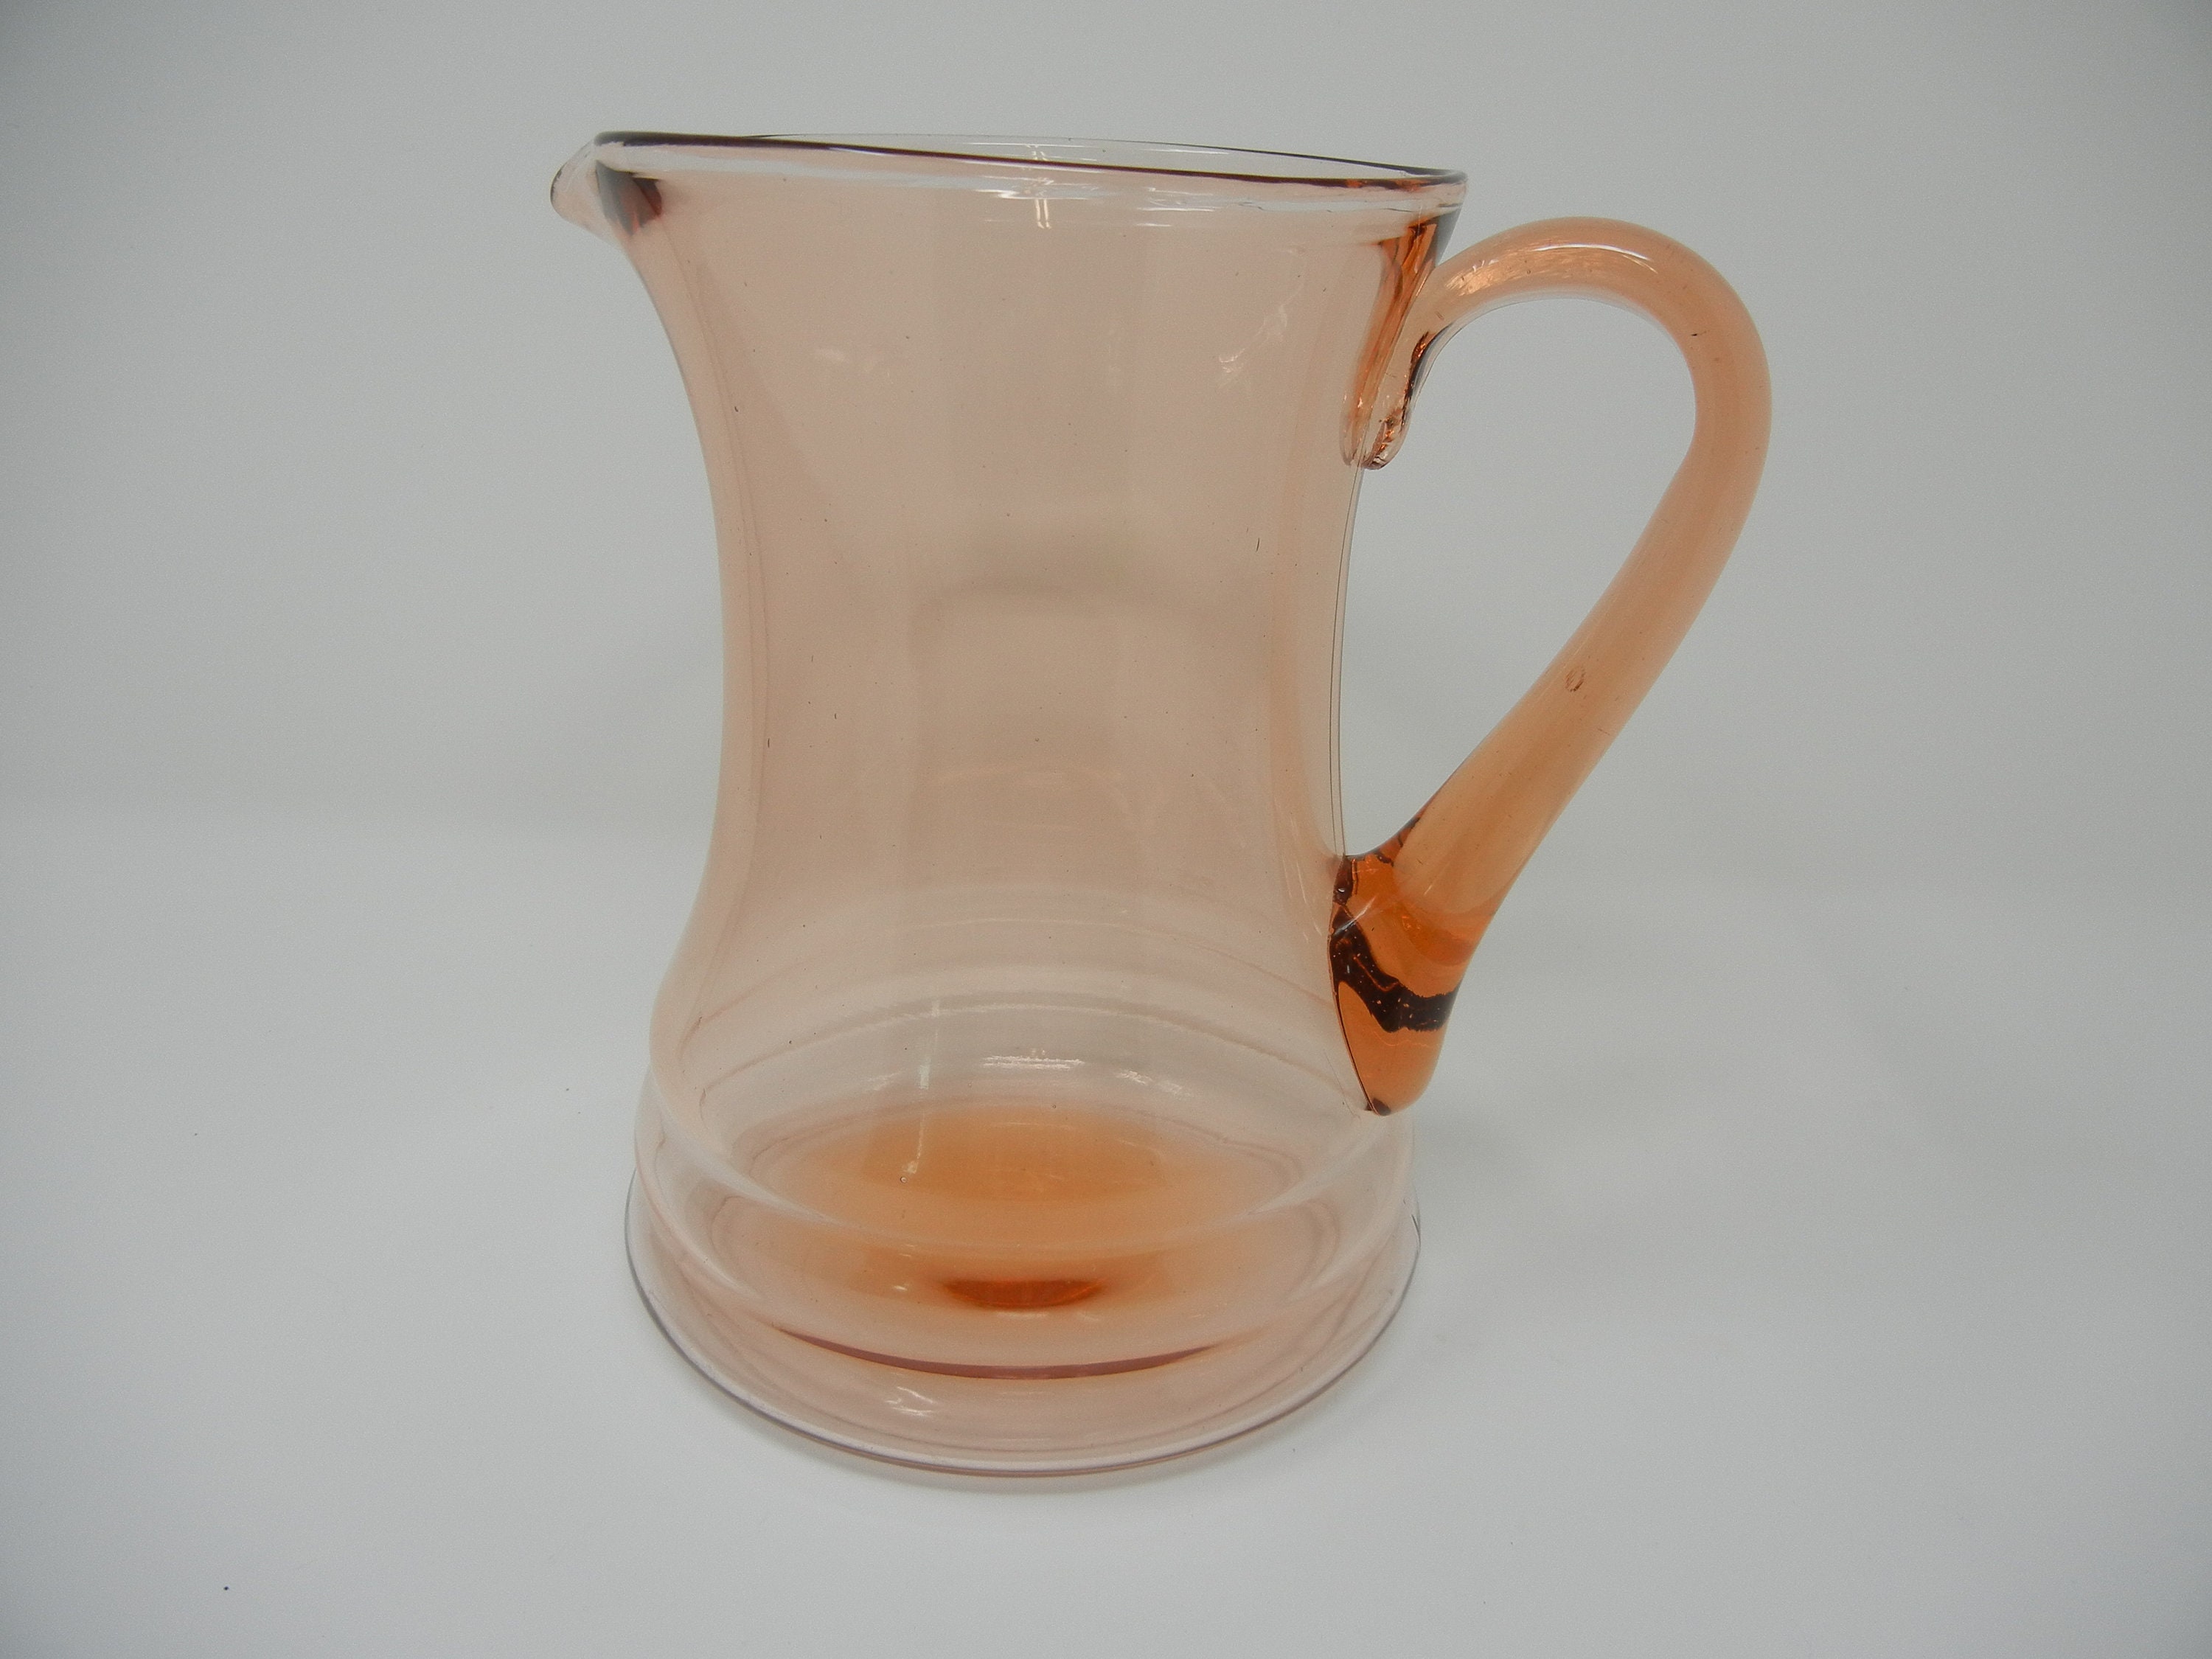 Antique Small Water or Lemonade Pitcher With Lid, Depression Glass Ca.  1930s, Pink Flamingo Color, Probably Heisey or Dunbar, Applied Handle 